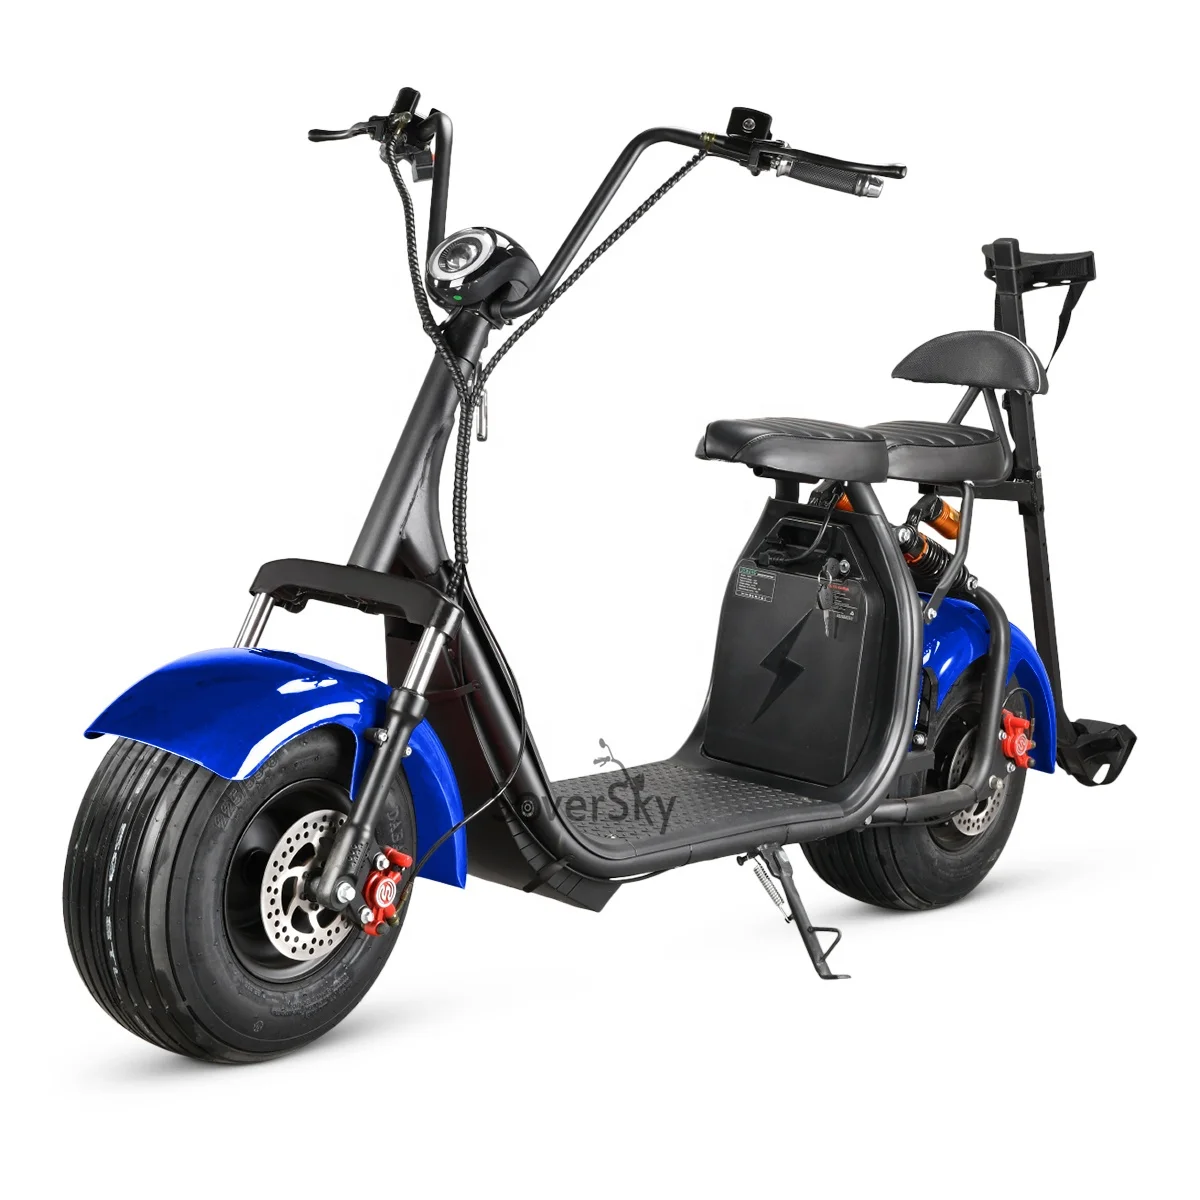 

SoverSky Fat Tire Citycoco Scooter Ebike 2000w Electric Motorcycle US warehouse Lithium Battery golf rack golf carts ebikes eec